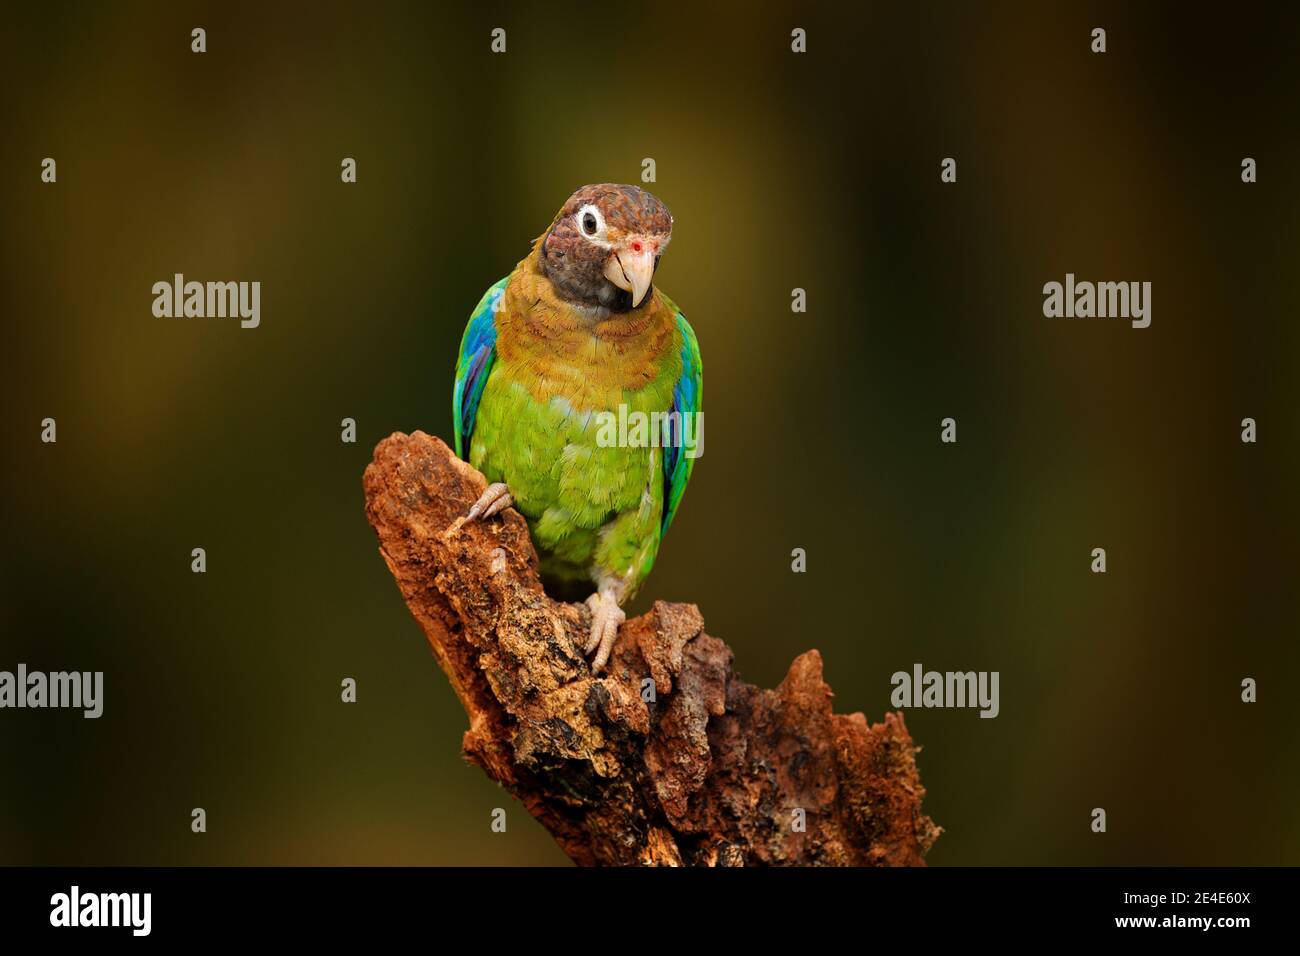 Detail of parrot Brown-hooded Parrot, Pionopsitta haematotis, Mexico, green parrot with brown head. Detail close-up portrait of bird from Central Amer Stock Photo